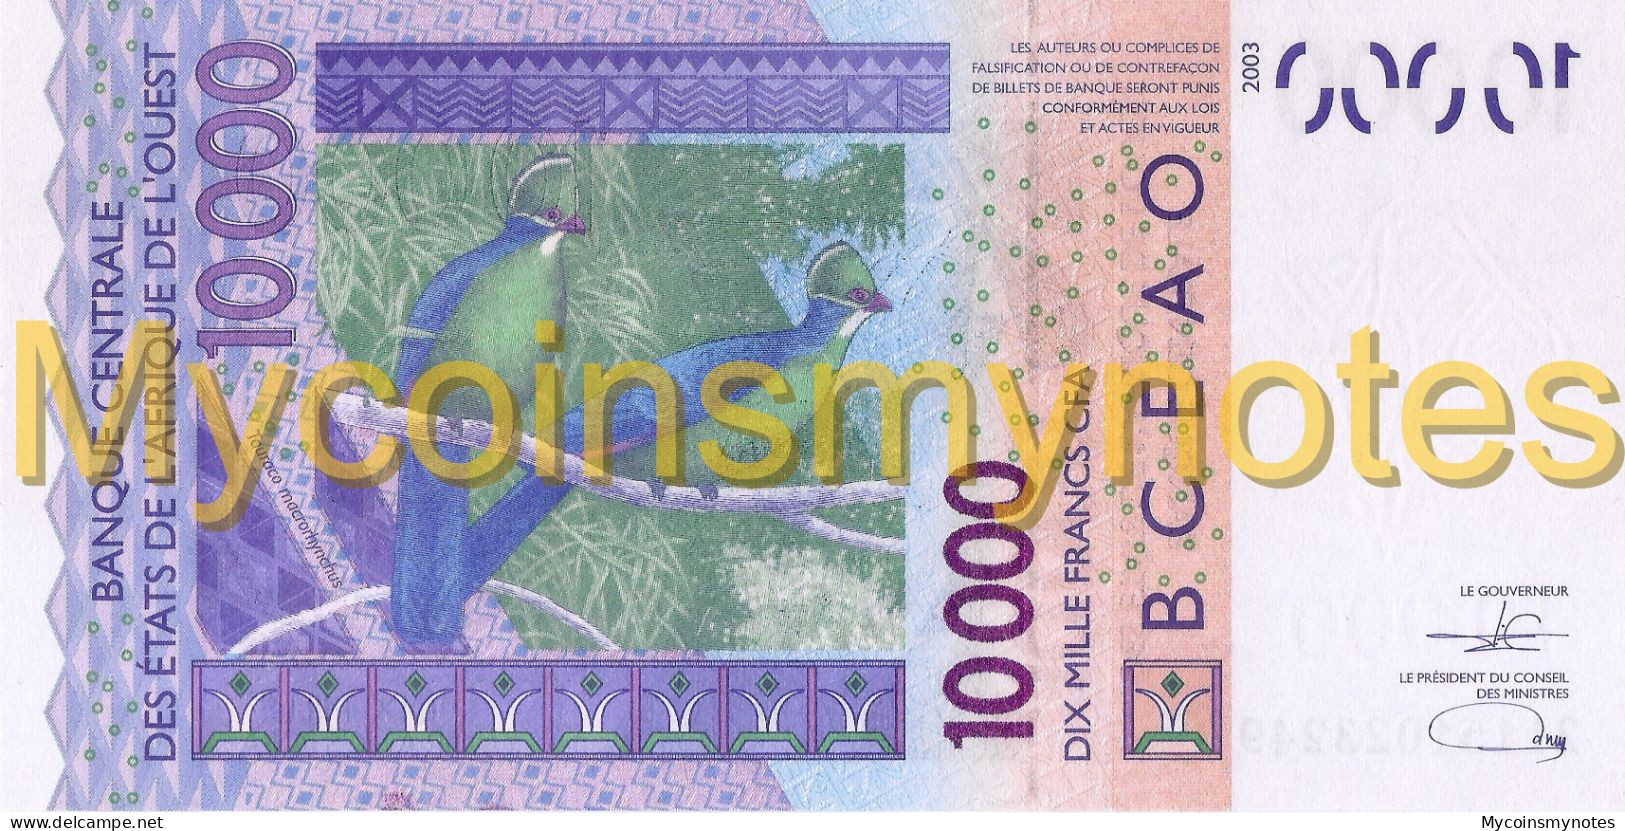 WEST AFRICAN STATES, BURKINA FASO, 10000, 2021, Code C, (Not Yet In Catalog), New Signature, UNC - West-Afrikaanse Staten